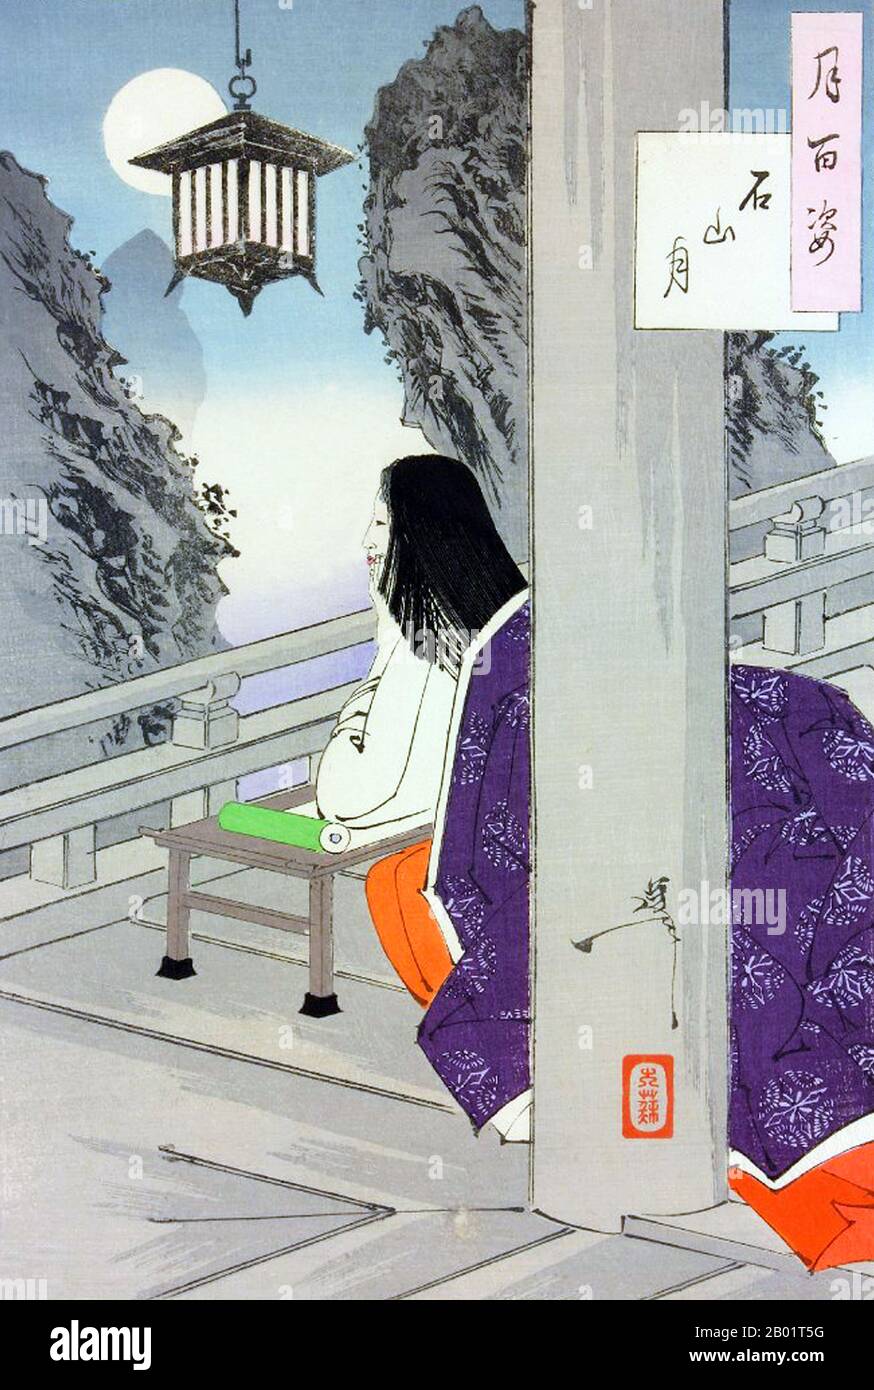 Japan: 'Ishiyama Moon'. Lady Murasaki Shikibu (c. 973-1025) gazing at the moon for inspiration. Ukiyo-e woodblock print from the series 'One Hundred Aspects of the Moon' by Tsukioka Yoshitoshi (1839-1892), 1889.  Murasaki Shikibu was a Japanese novelist, poet and lady-in-waiting at the Imperial court during the Heian period. She is best known as the author of 'The Tale of Genji', written in Japanese between about 1000 and 1012. Murasaki Shikibu is a nickname; her real name is unknown, but she may have been Fujiwara Takako, who was mentioned in a 1007 court diary as an imperial lady-in-waiting. Stock Photo